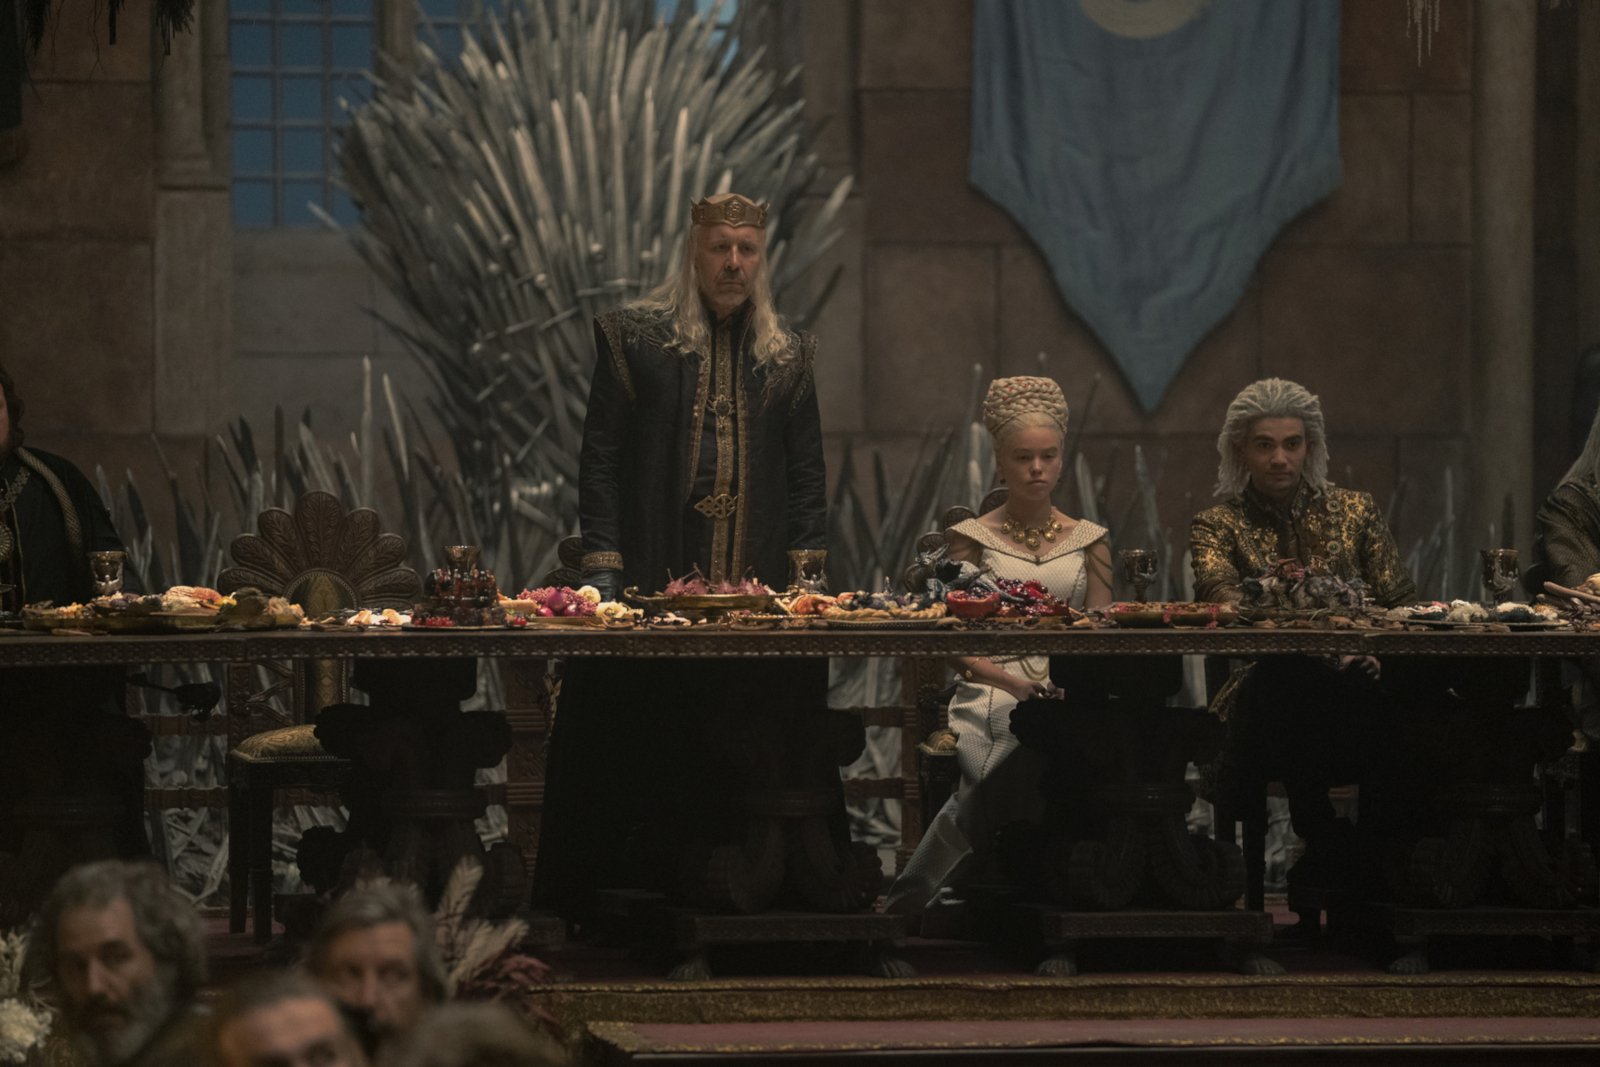 Paddy Considine, Milly Alcock, and Theo Nate as Viserys Targaryen, Rhaenyra Targaryen, and Laenor Velaryon in 'House of the Dragon' for our article about episode 6's release date